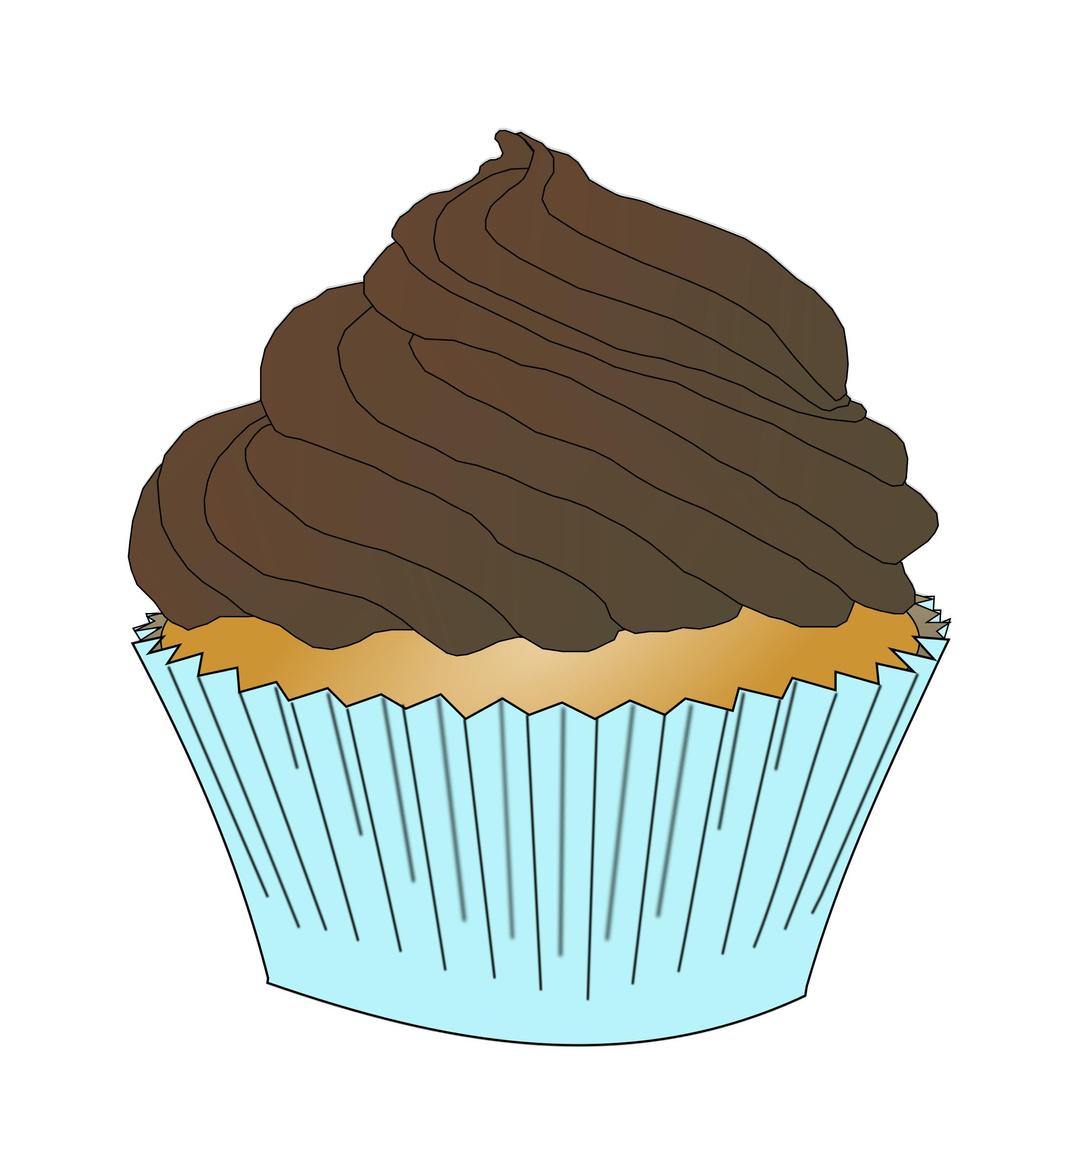 Chocolate Frosting Cupcake png transparent